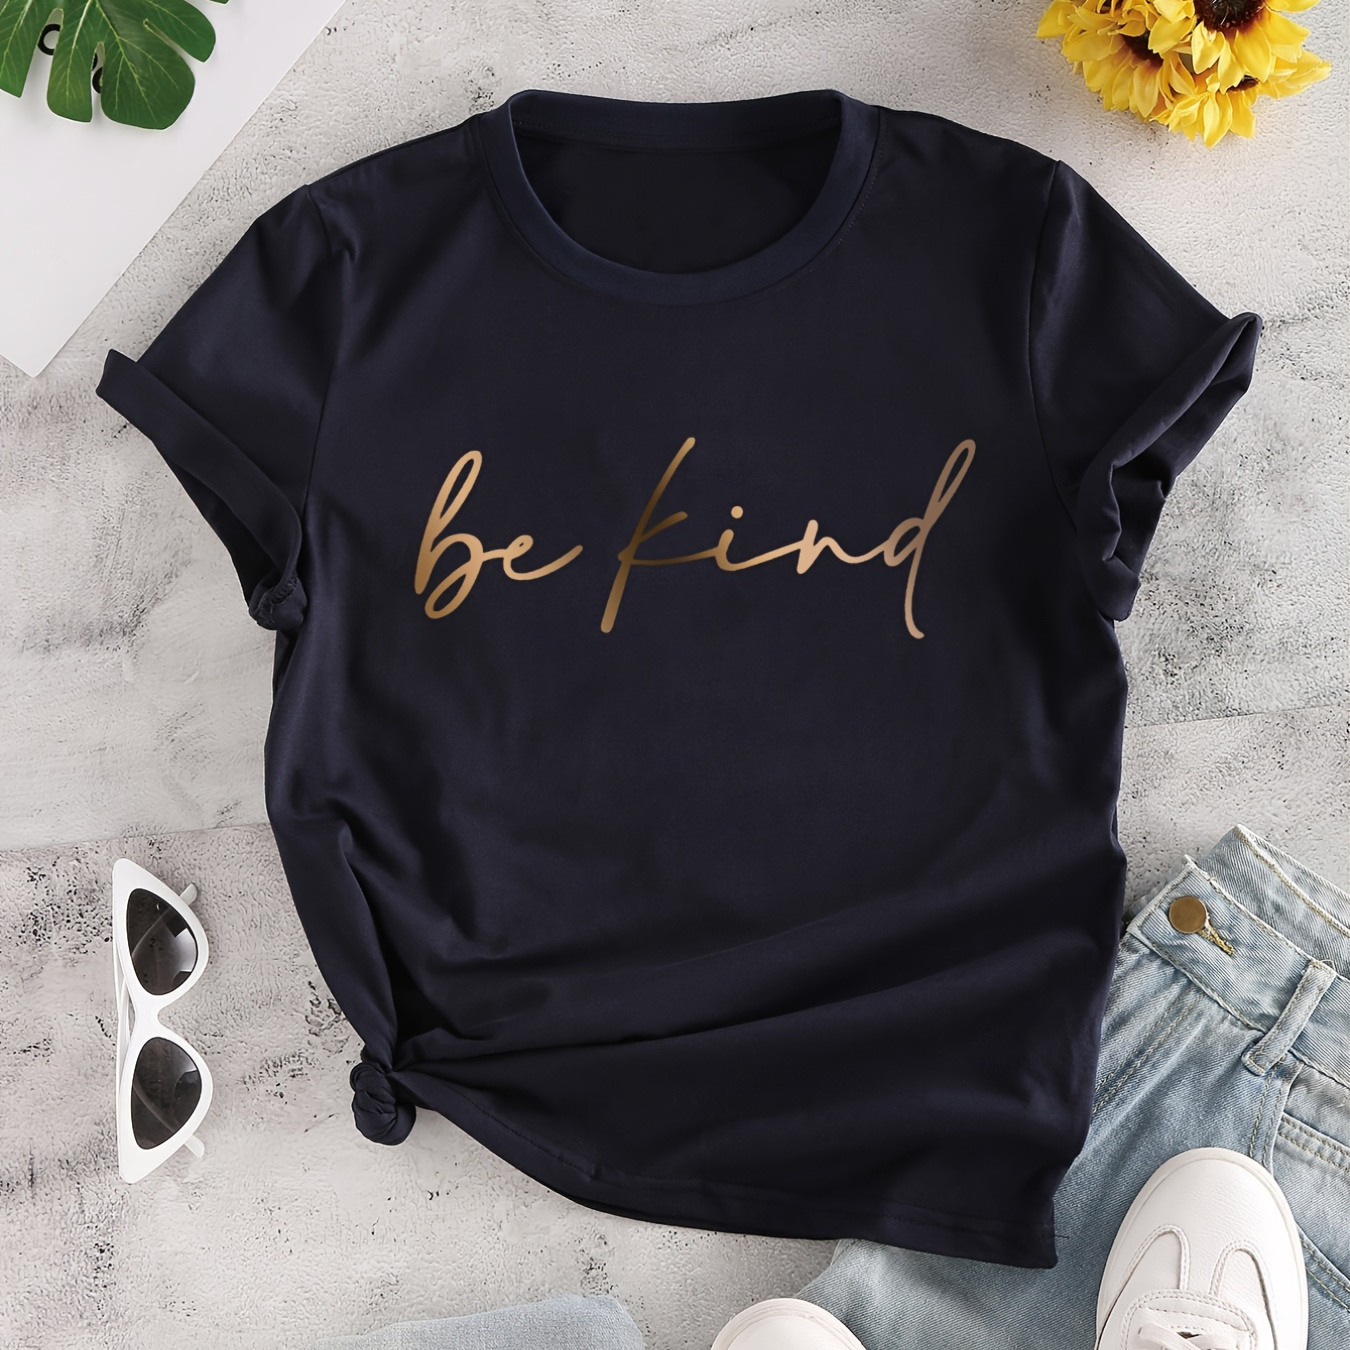 

Women's Letter Print Crew Neck T-shirt, Casual Short Sleeve T-shirt, Casual Every Day Tops, Women's Clothing